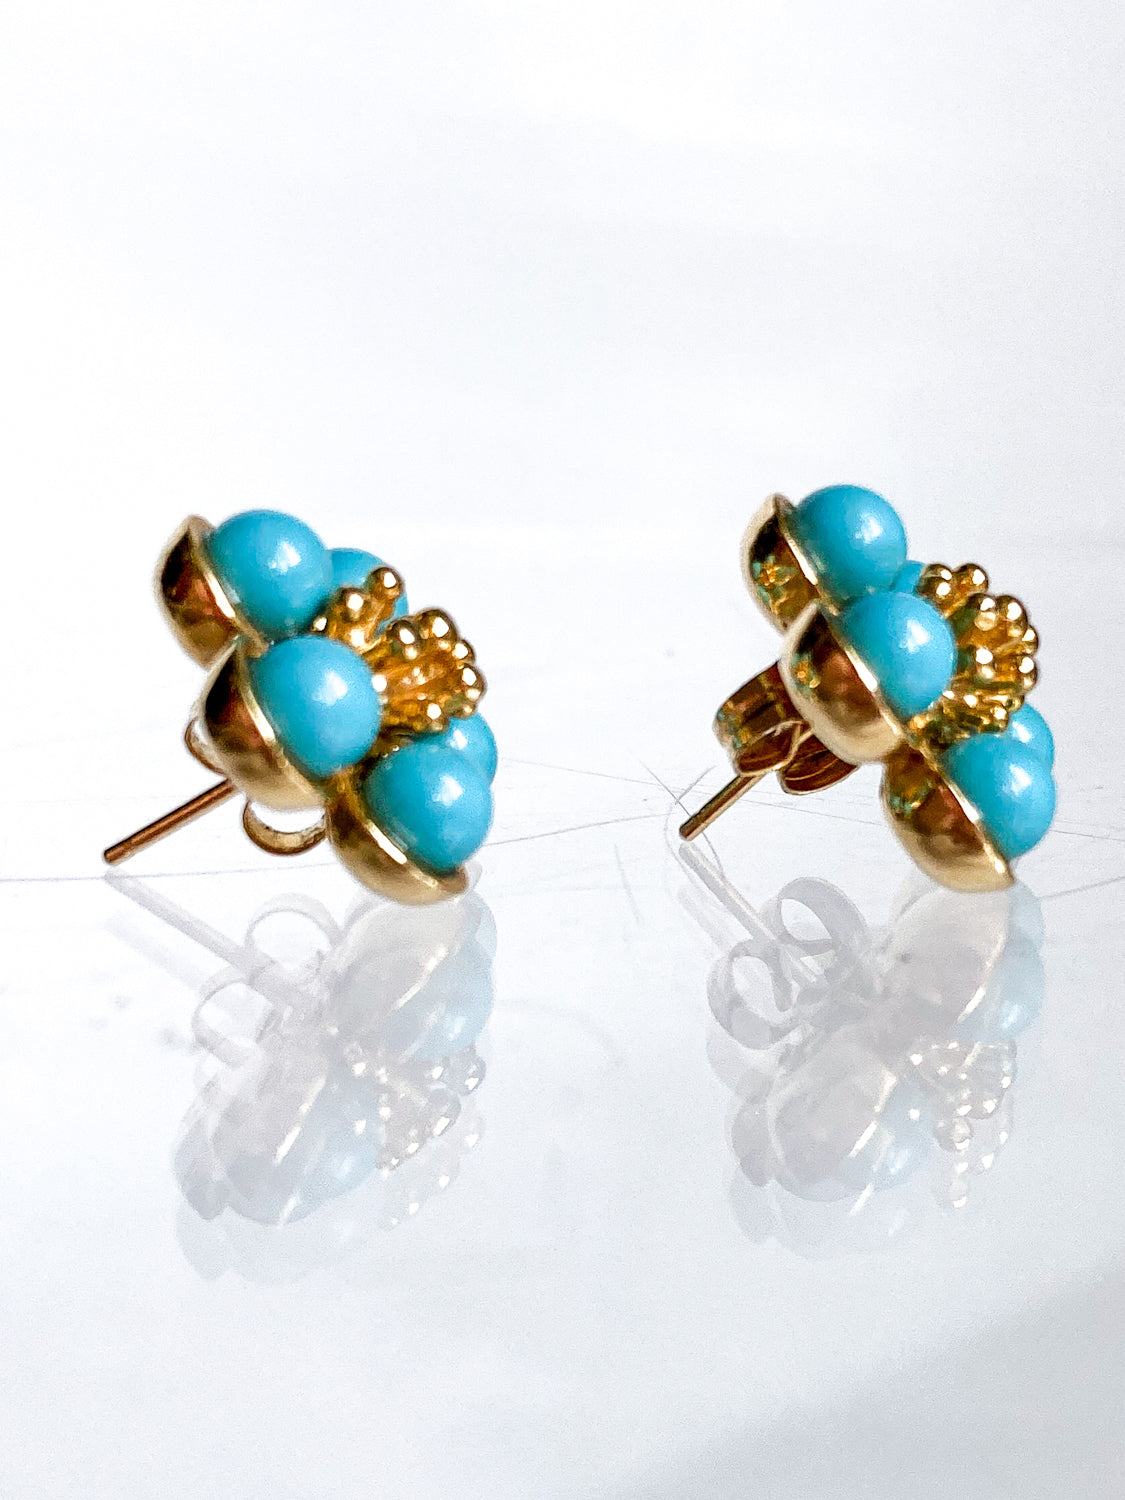 Gorgeous 14K Yellow Gold Turquoise Bead Flower Post Earrings Profile